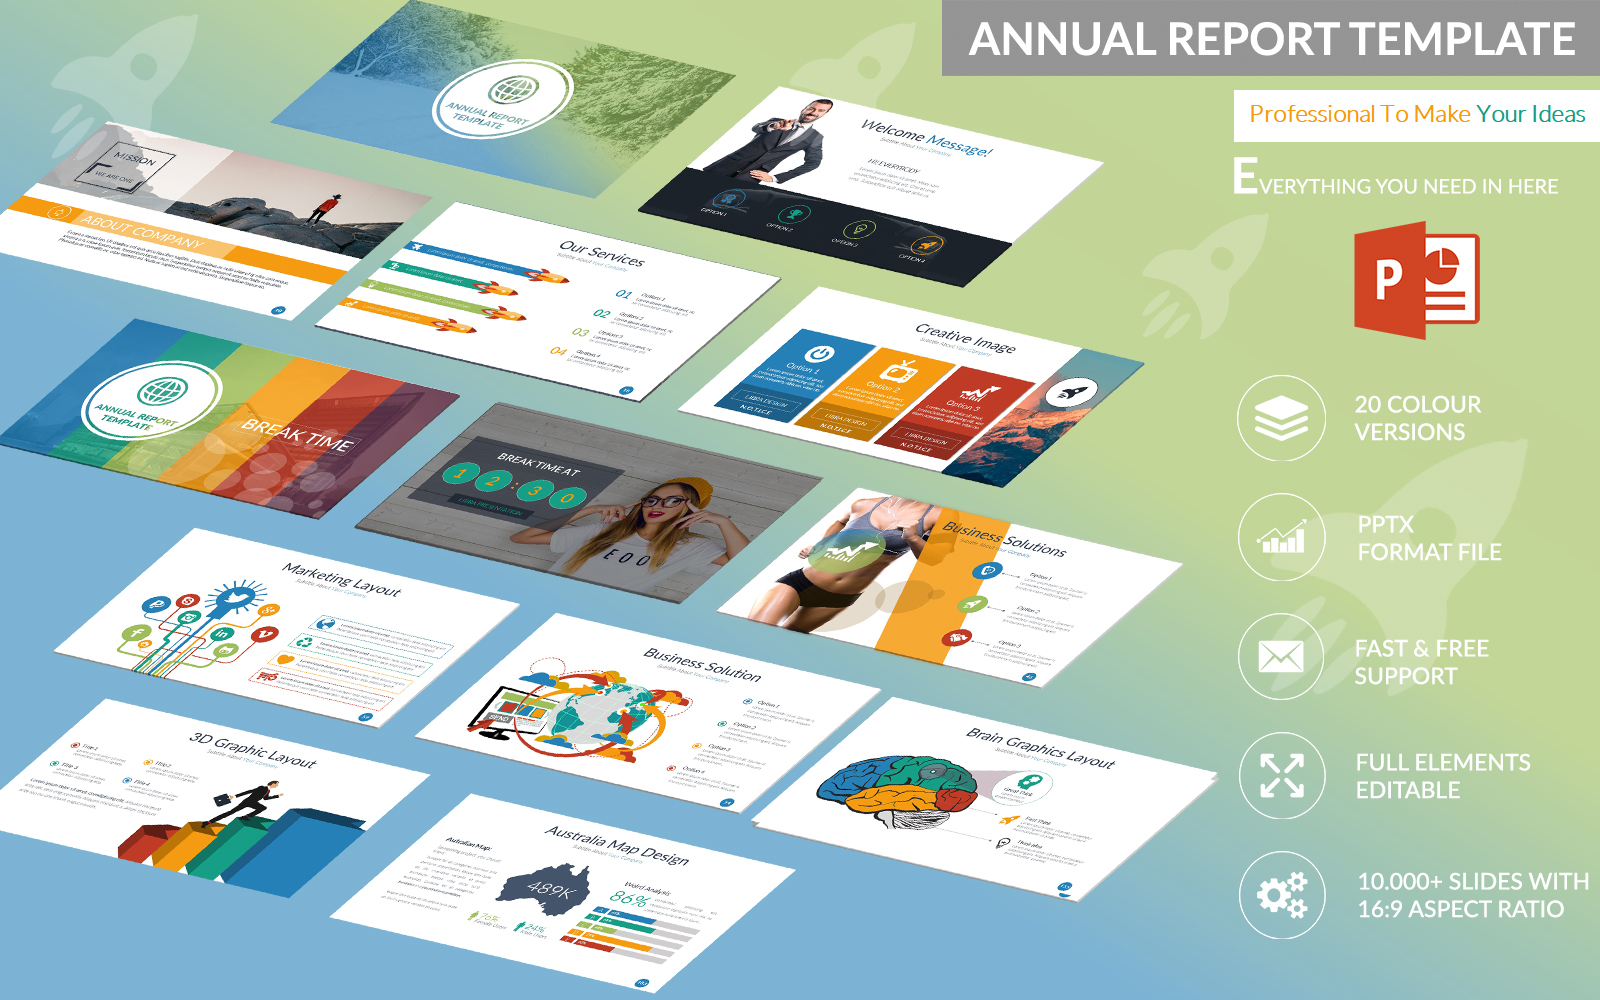 Annual Report Powerpoint Template.